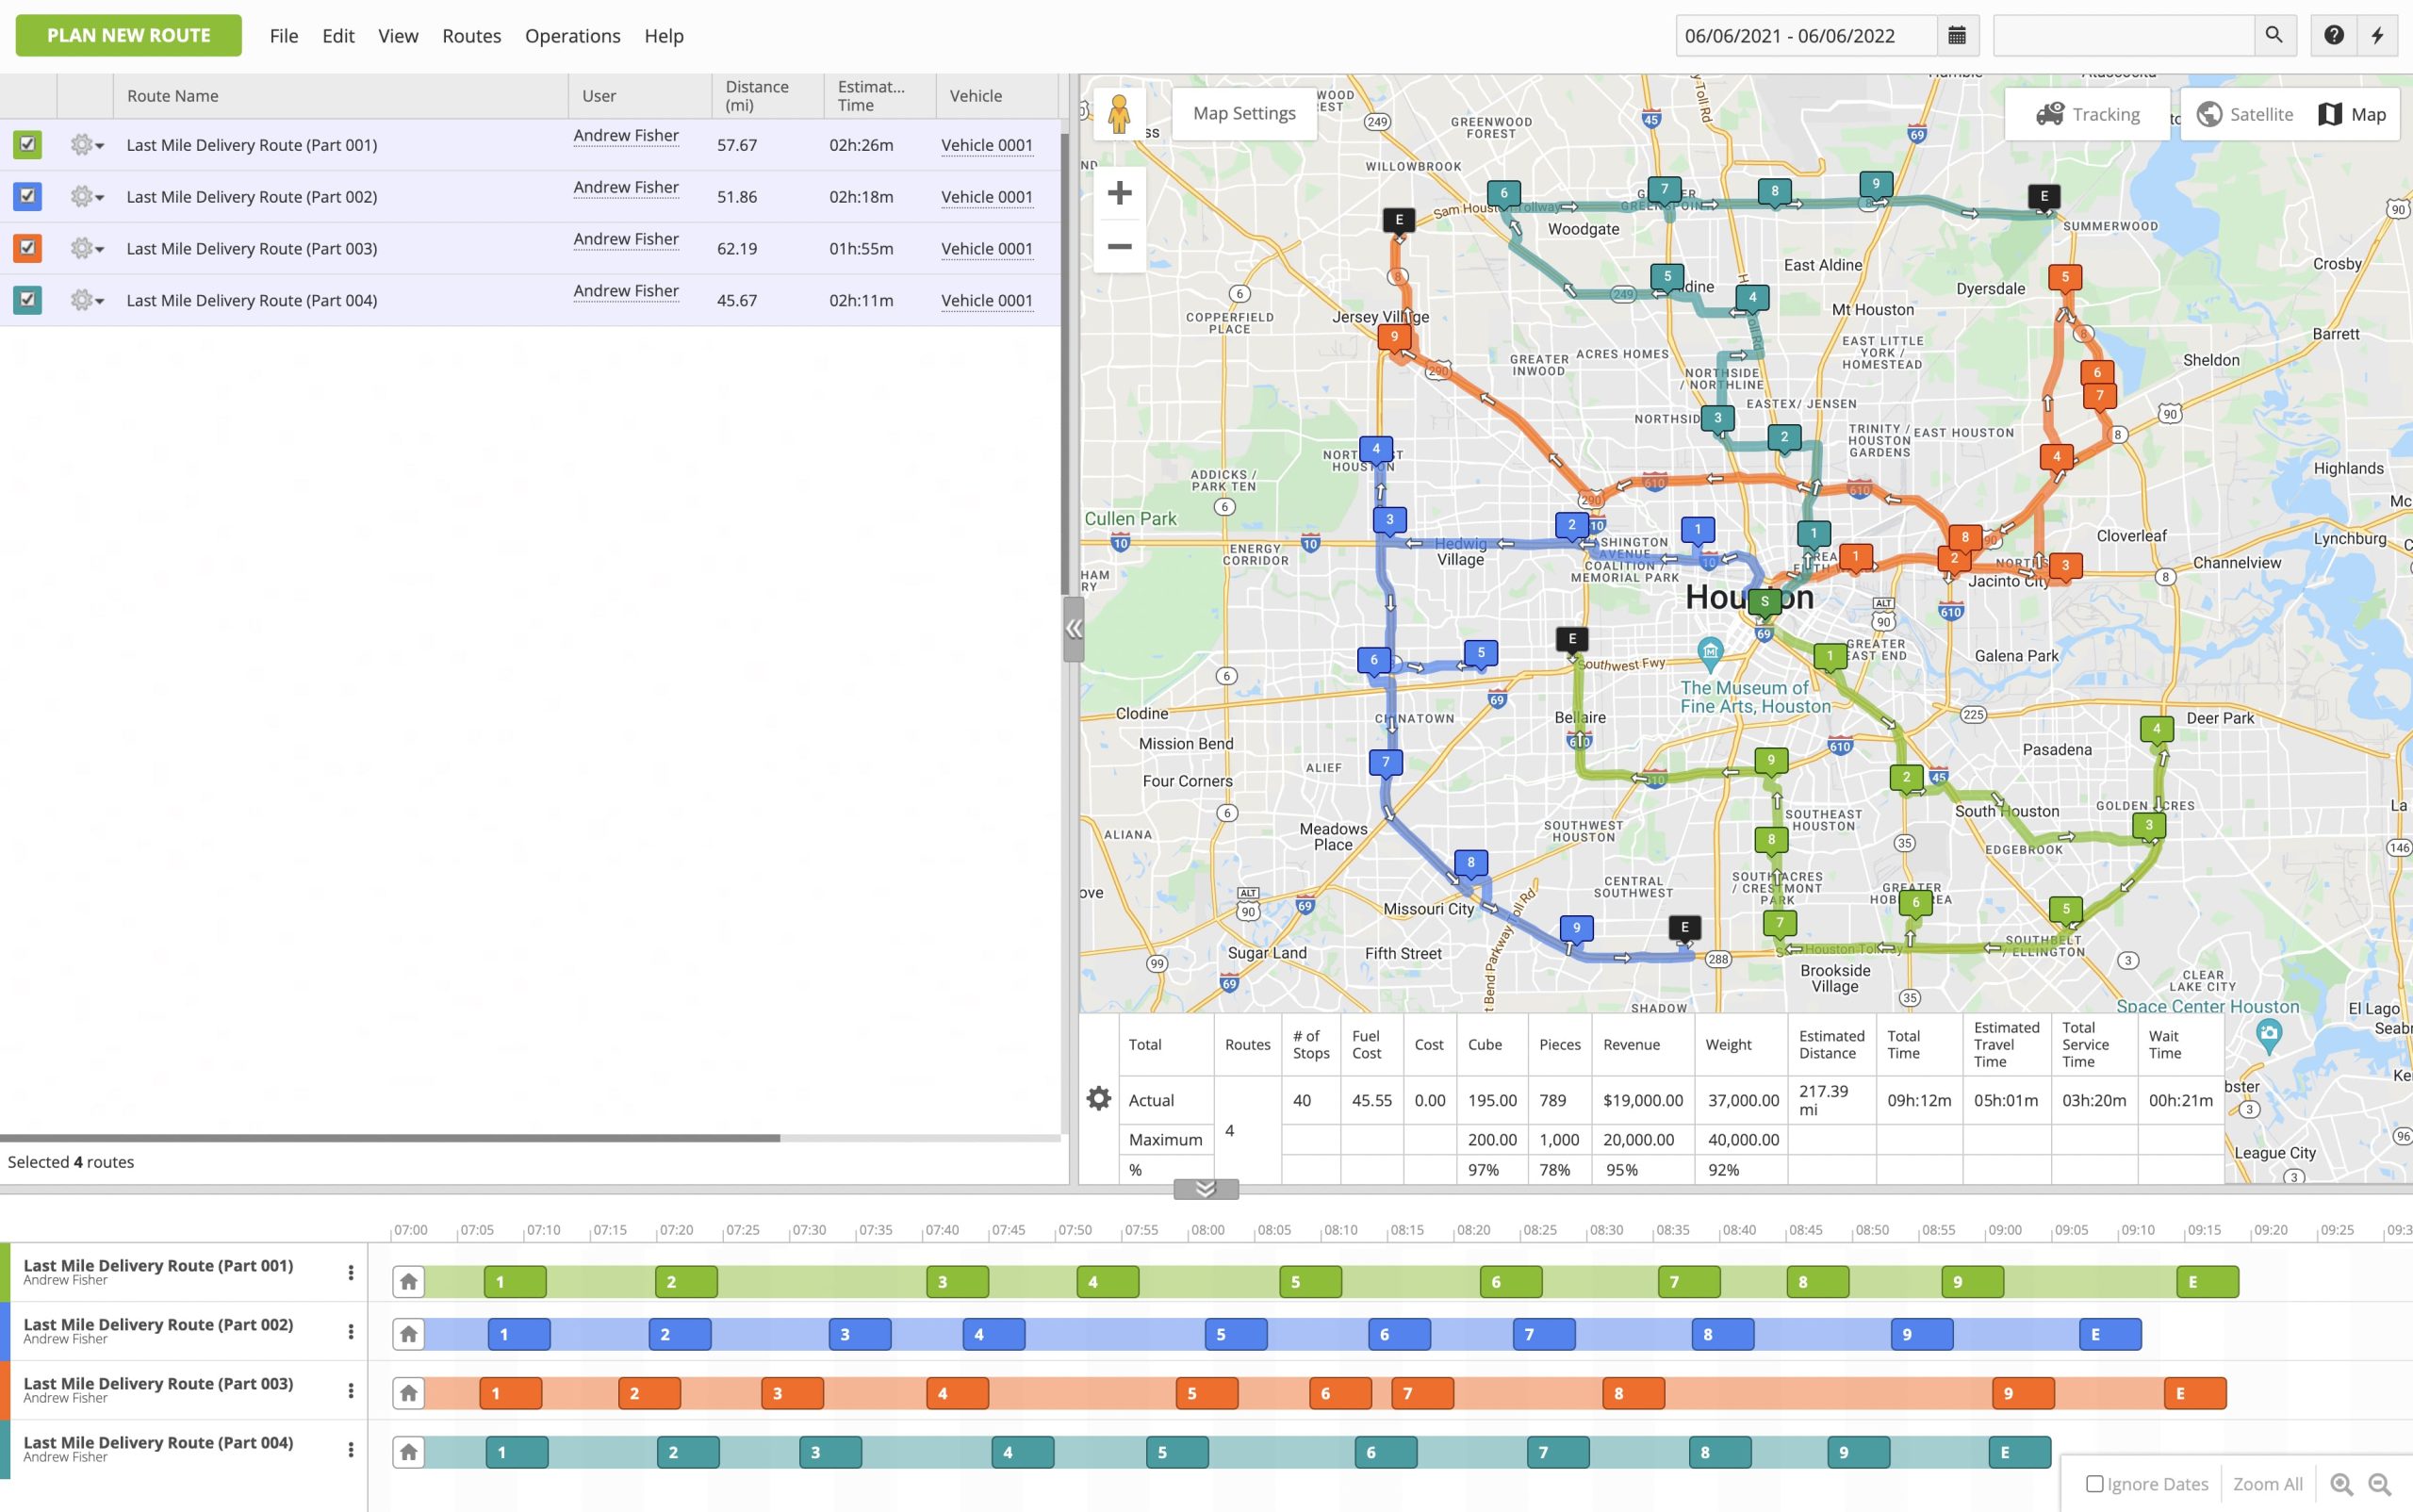 Using route optimization profiles with custom optimization settings to plan routes.